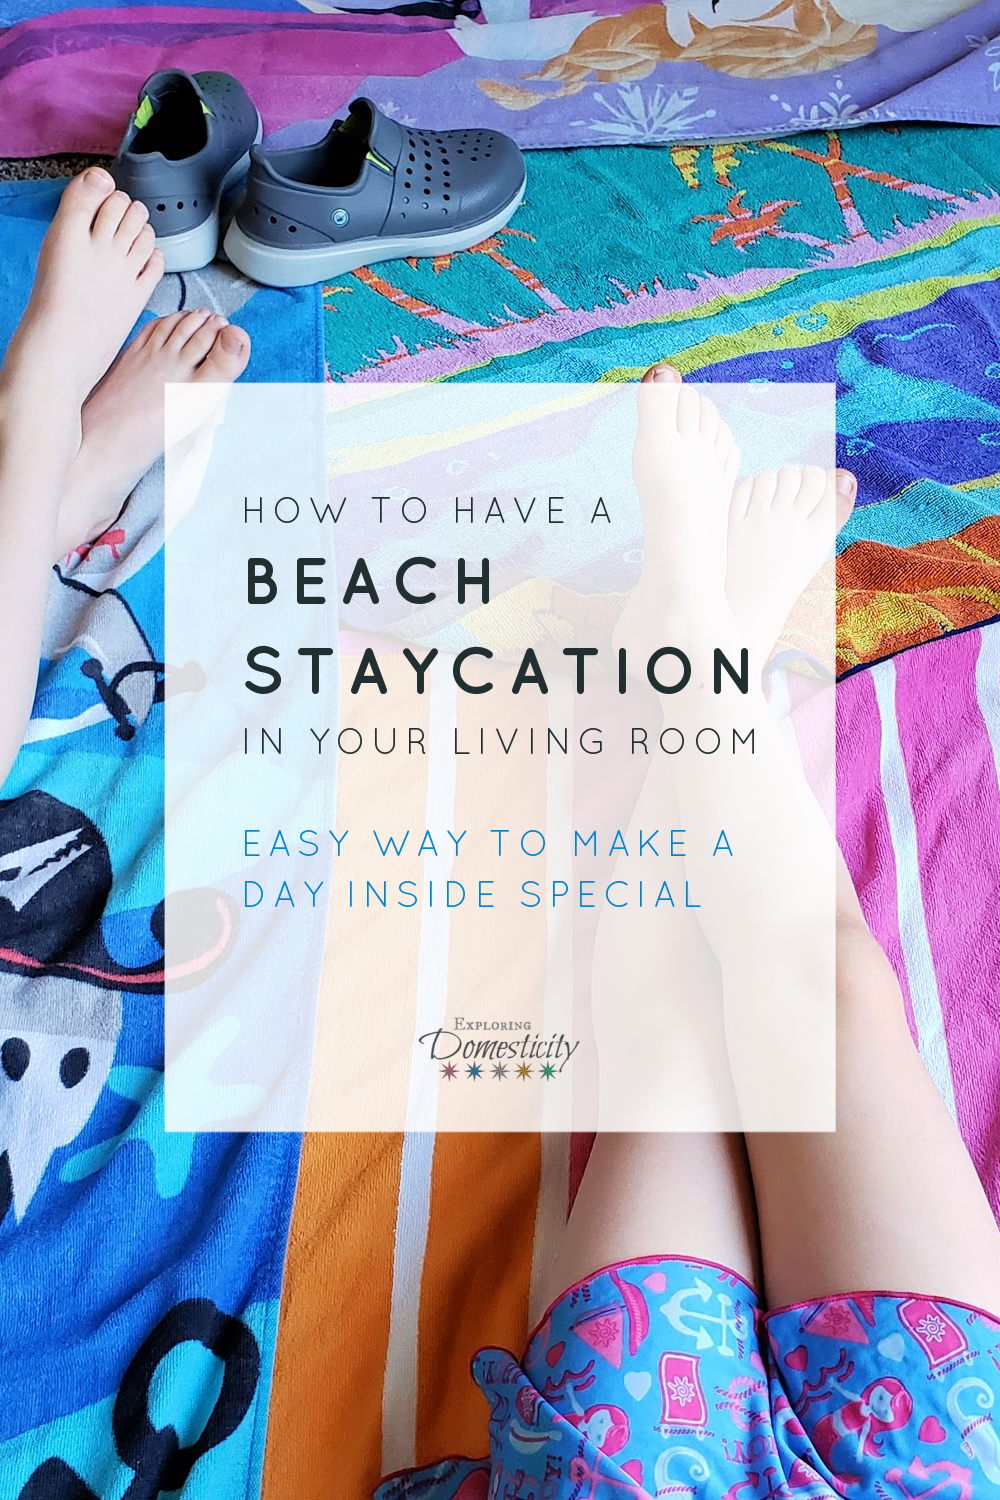 How to have a beach staycation in your living room - make a day inside special